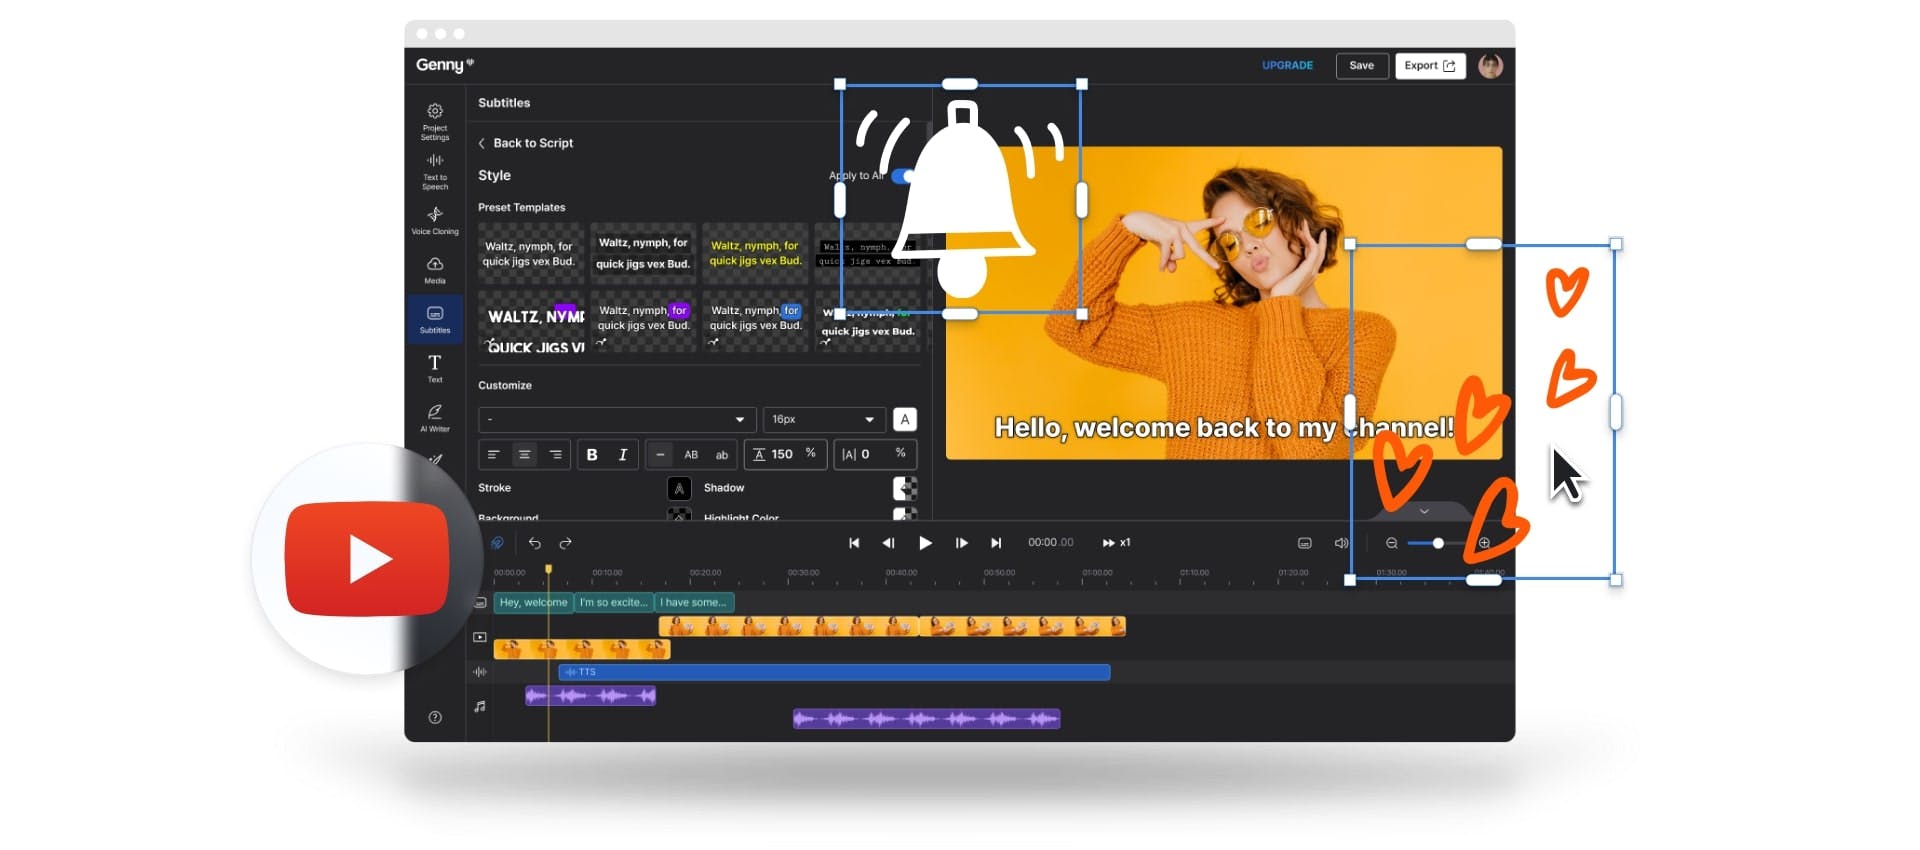 screenshot of YouTube video editing platform Genny by LOVO AI showing timeline editor and subtitle features